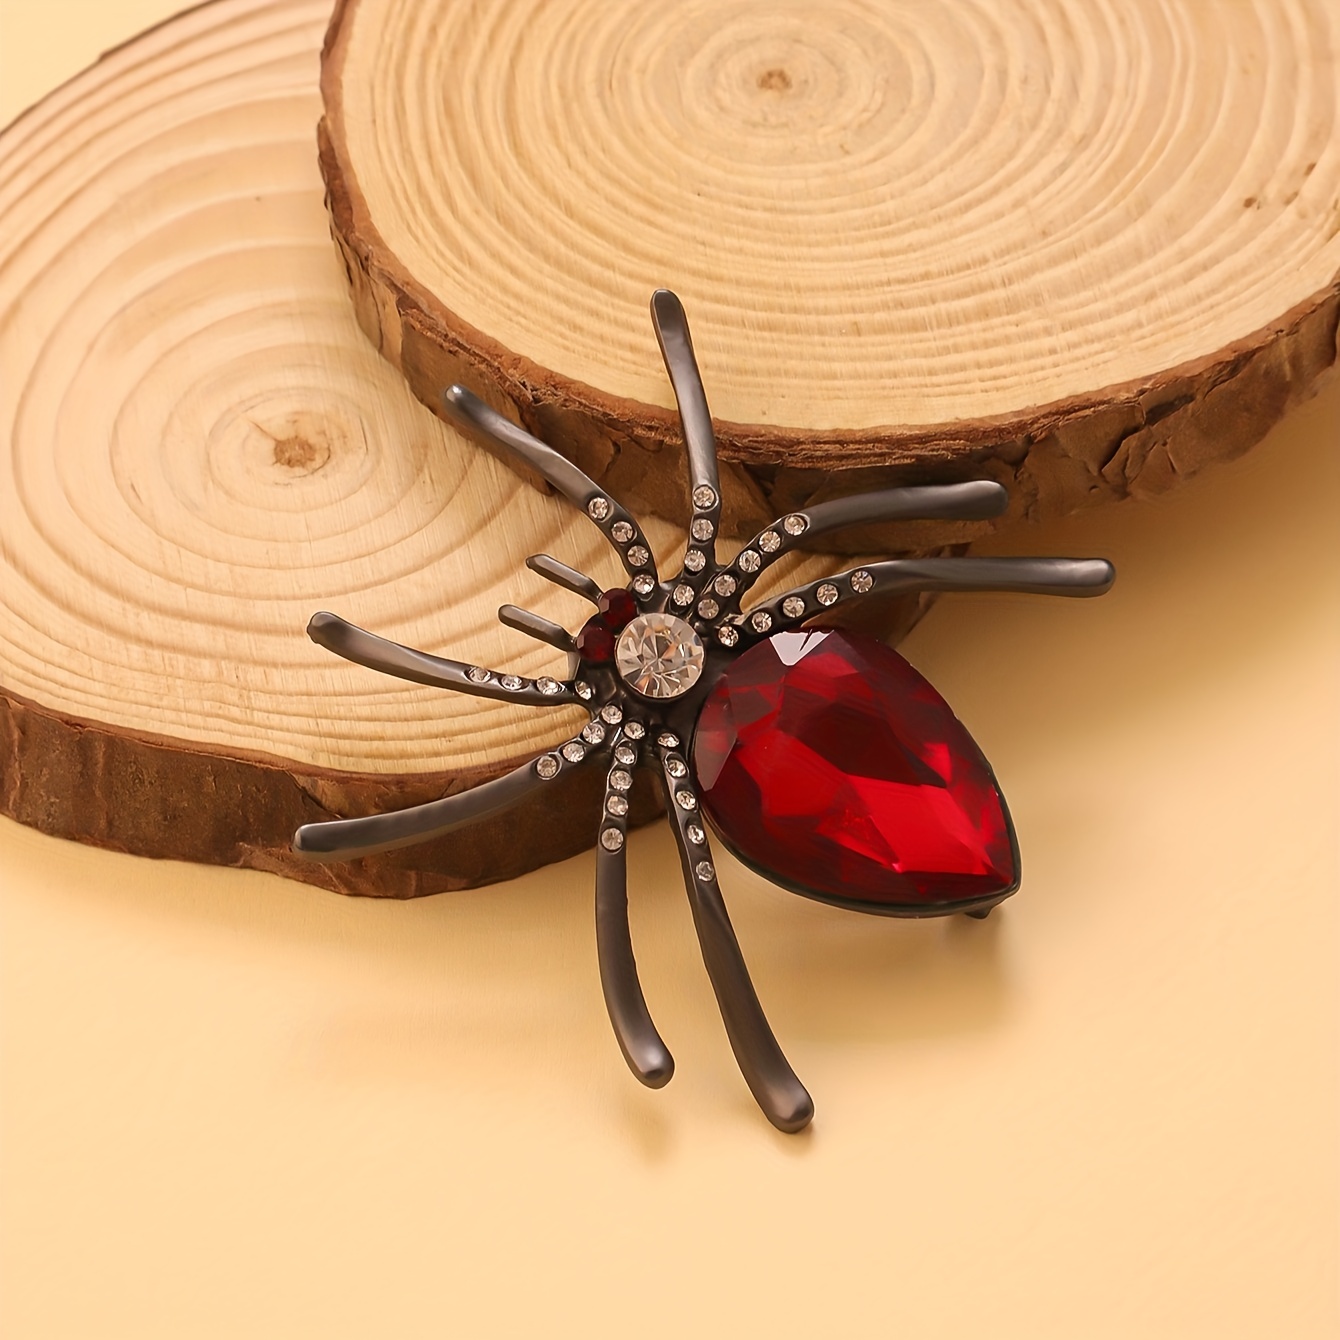 Reclaimed Vintage Inspired Spider Brooch With Red Glass